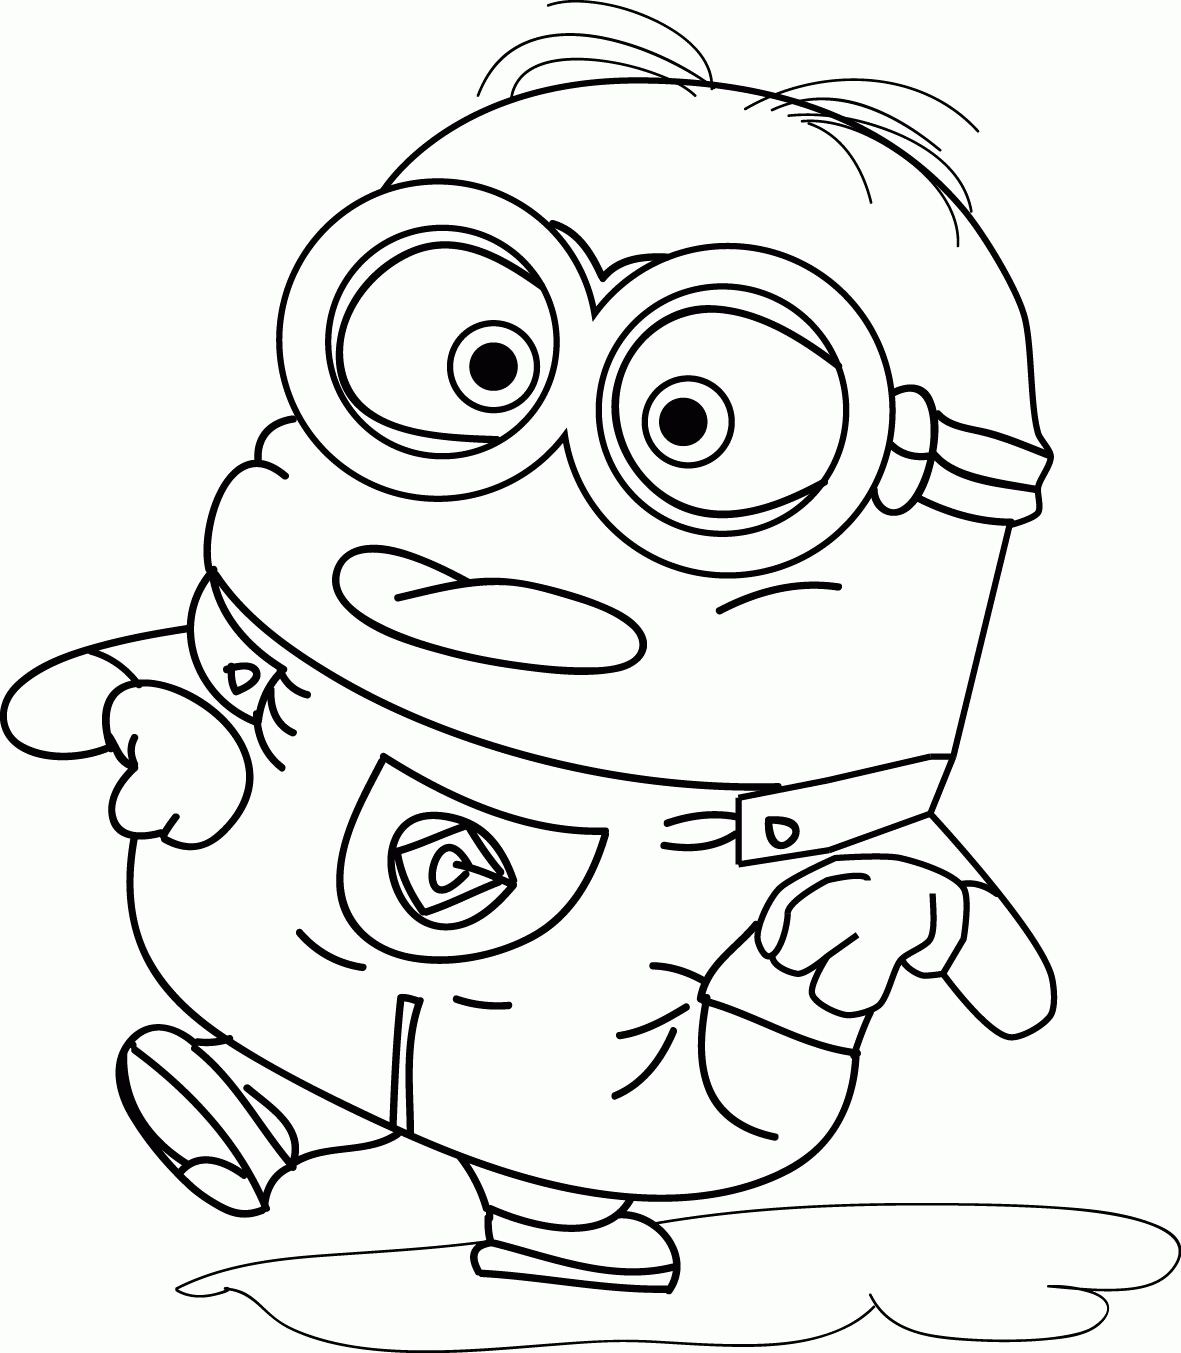 Minion Put One's Tongue Out Coloring Page | Wecoloringpage